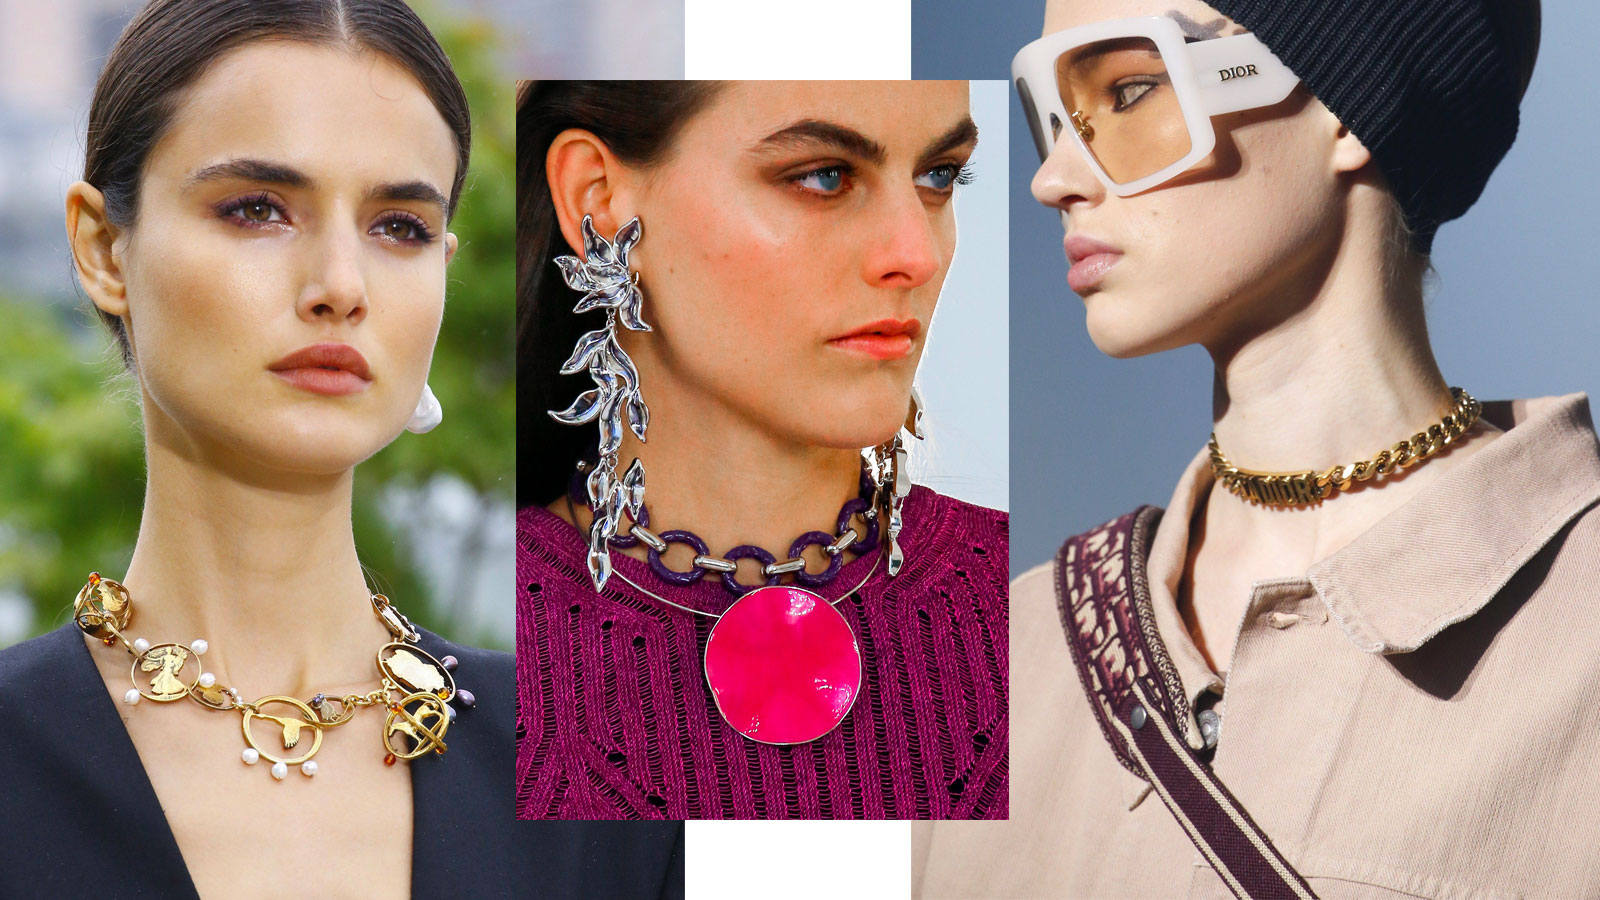 From left to right: Spring/Summer 2019 catwalk jewellery from Oscar de la Renta, Chloé and Dior